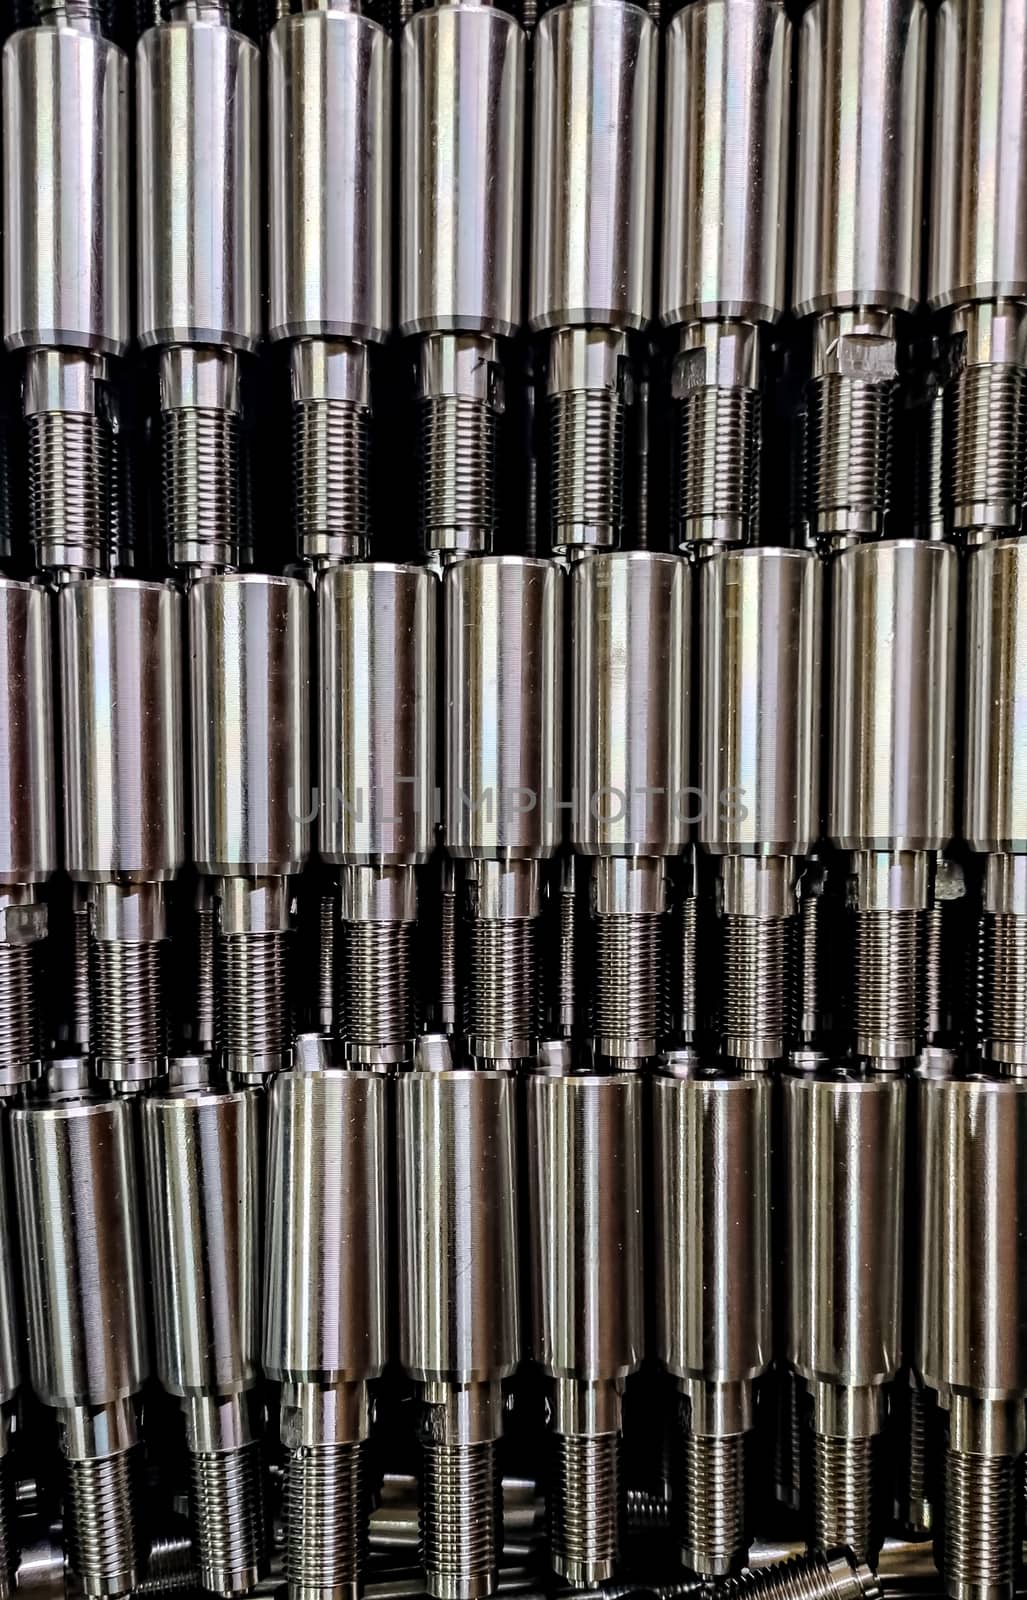 Close up image of stacked stainless steel semi-finished components ready for further processing. Can be used as abstract background.